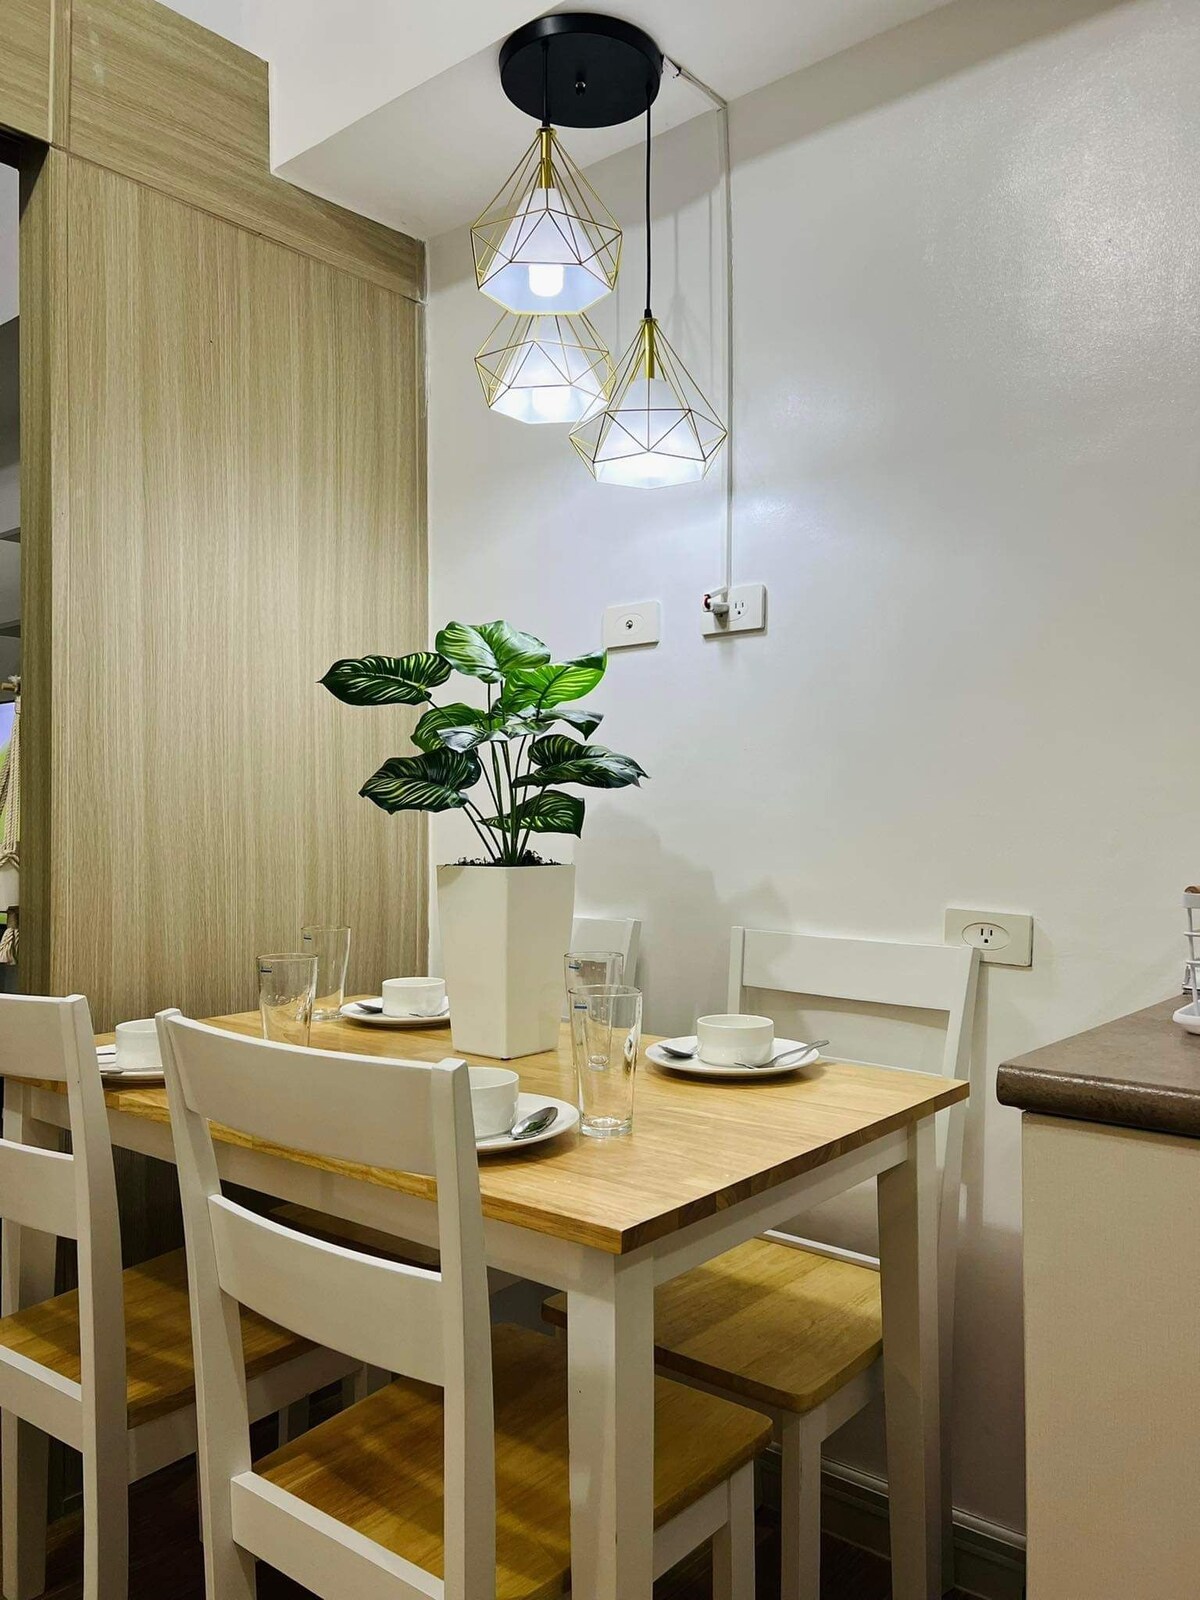 1BR Condo unit Grace Residences Avail.Staycation